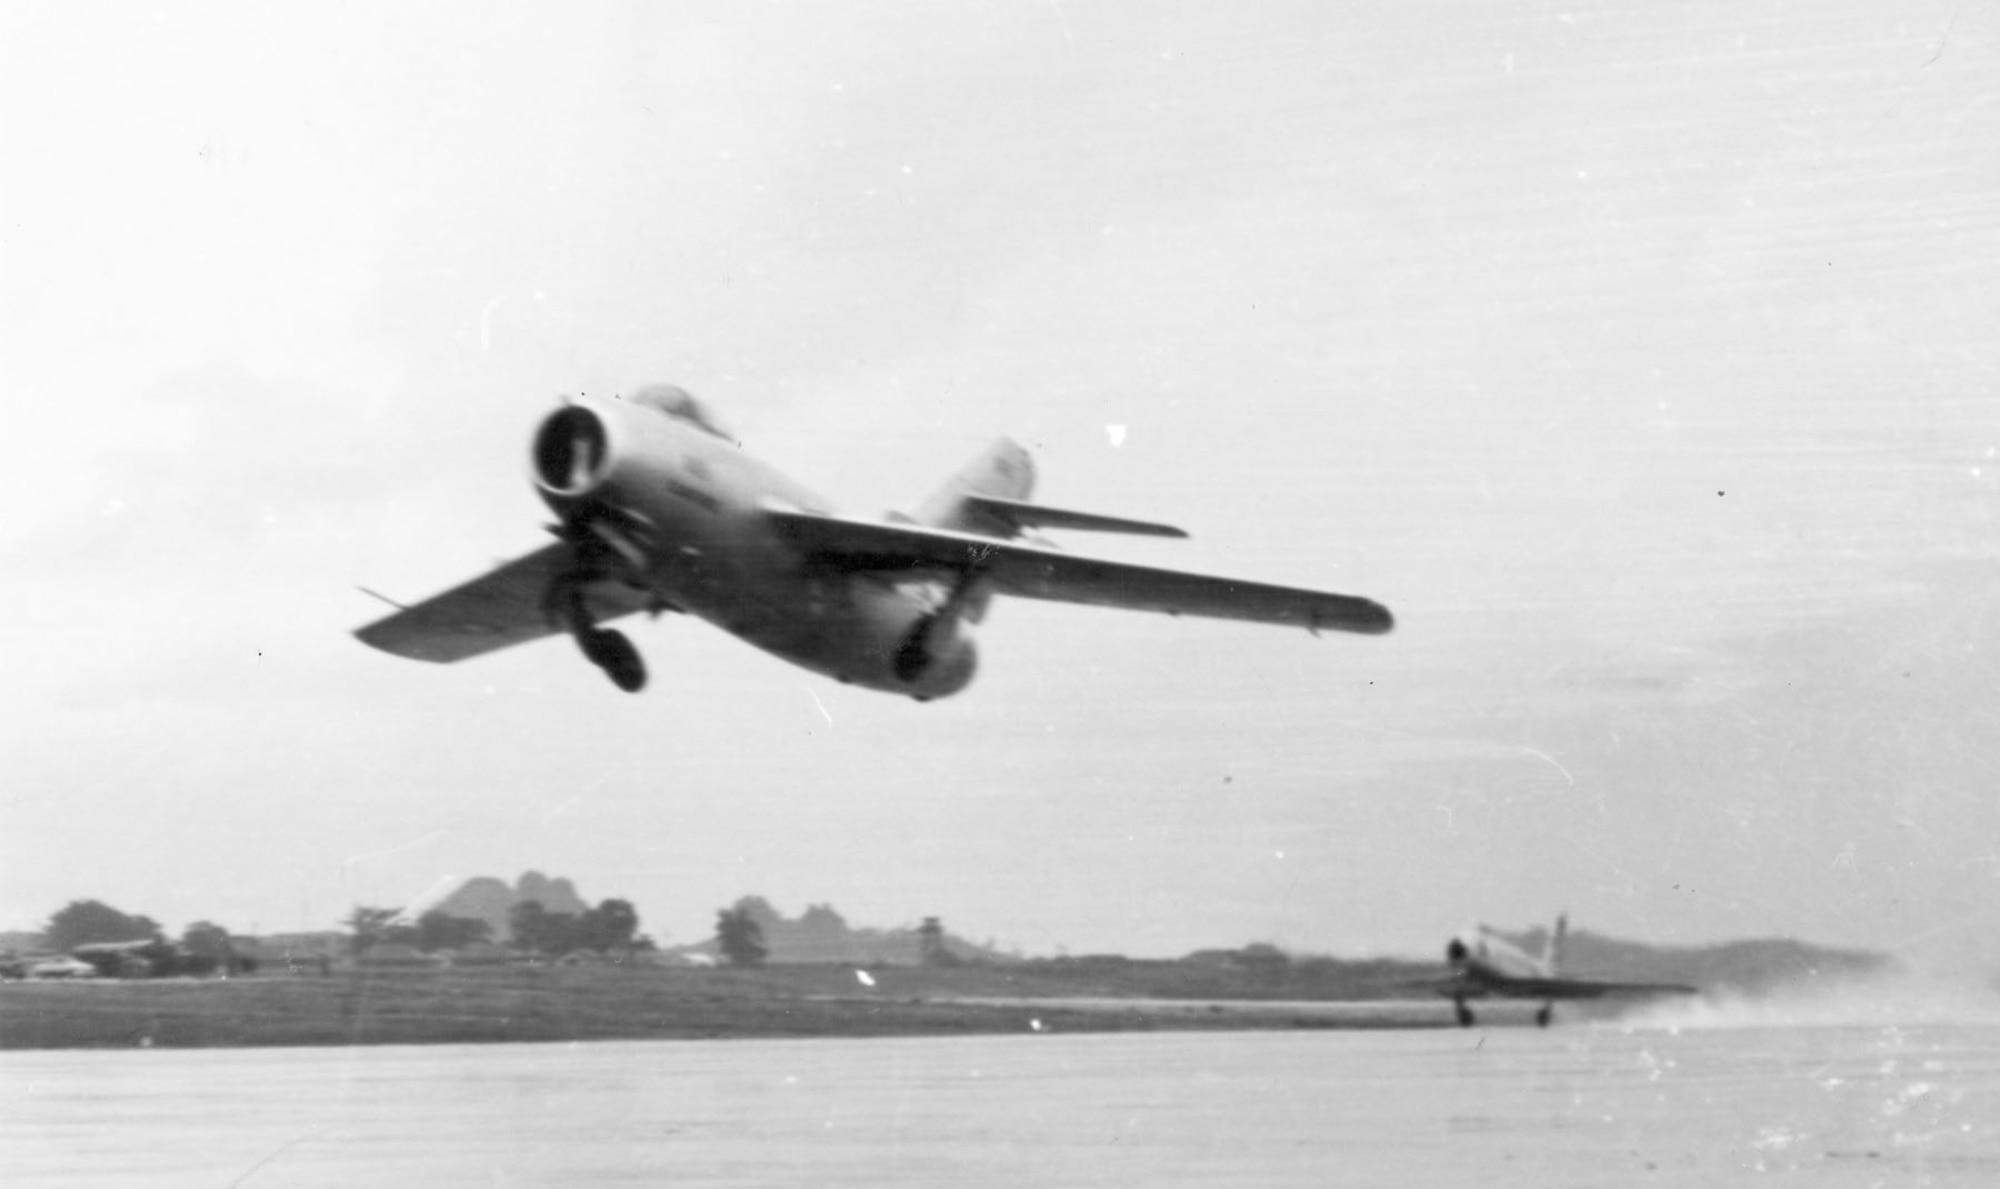 Taking off on its first USAF test flight in Okinawa, followed by an F-86. (U.S. Air Force photo)